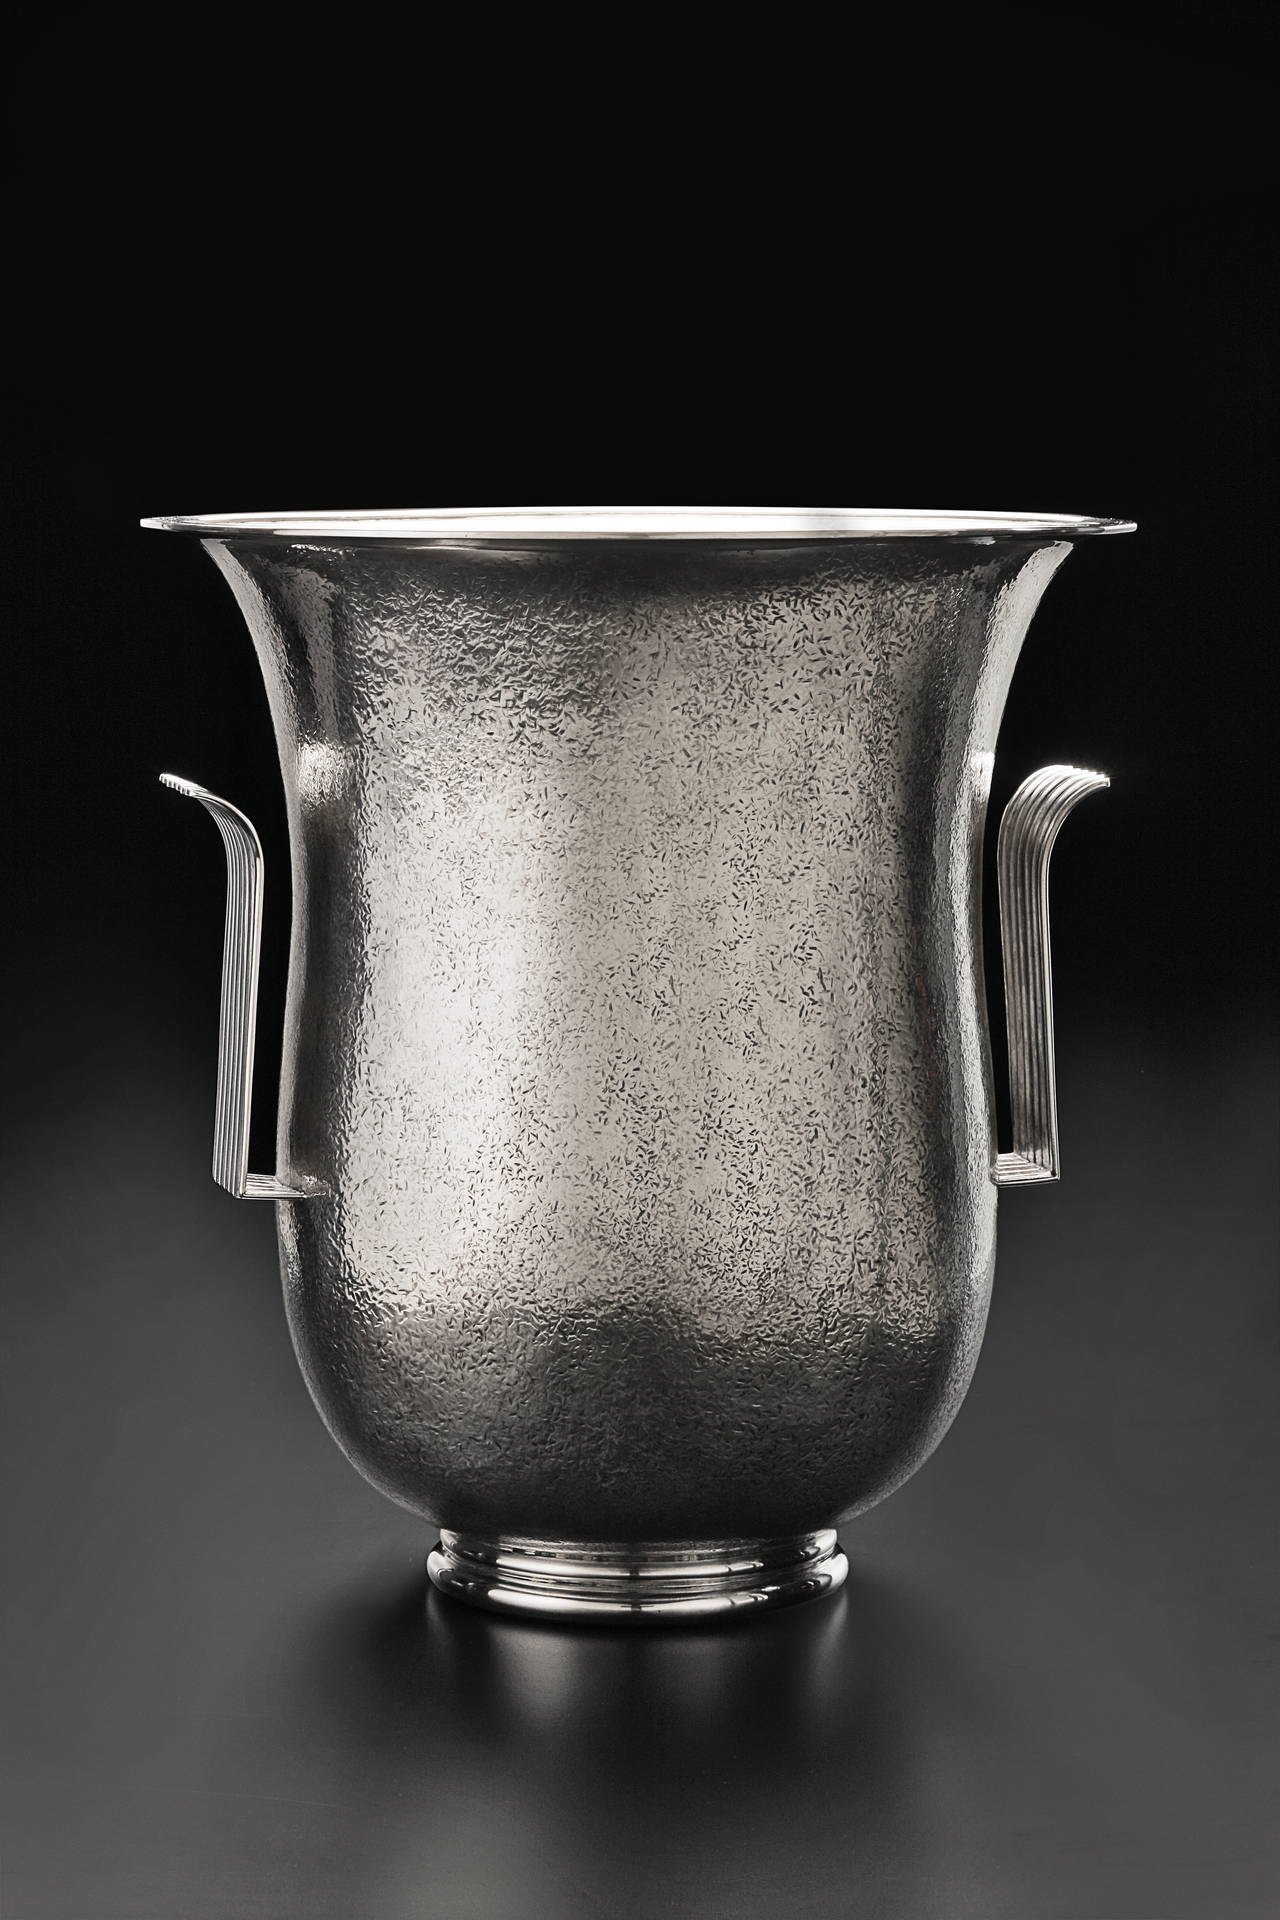 Luigi GENAZZI (1876-1946)

Vase

Milan 1930

Silver

Marked and signed 

Exhibitions: Very close model of a model presented in 1936 at the sixth triennial of Milan, and who received the first prize.

A large vase in hammered silver